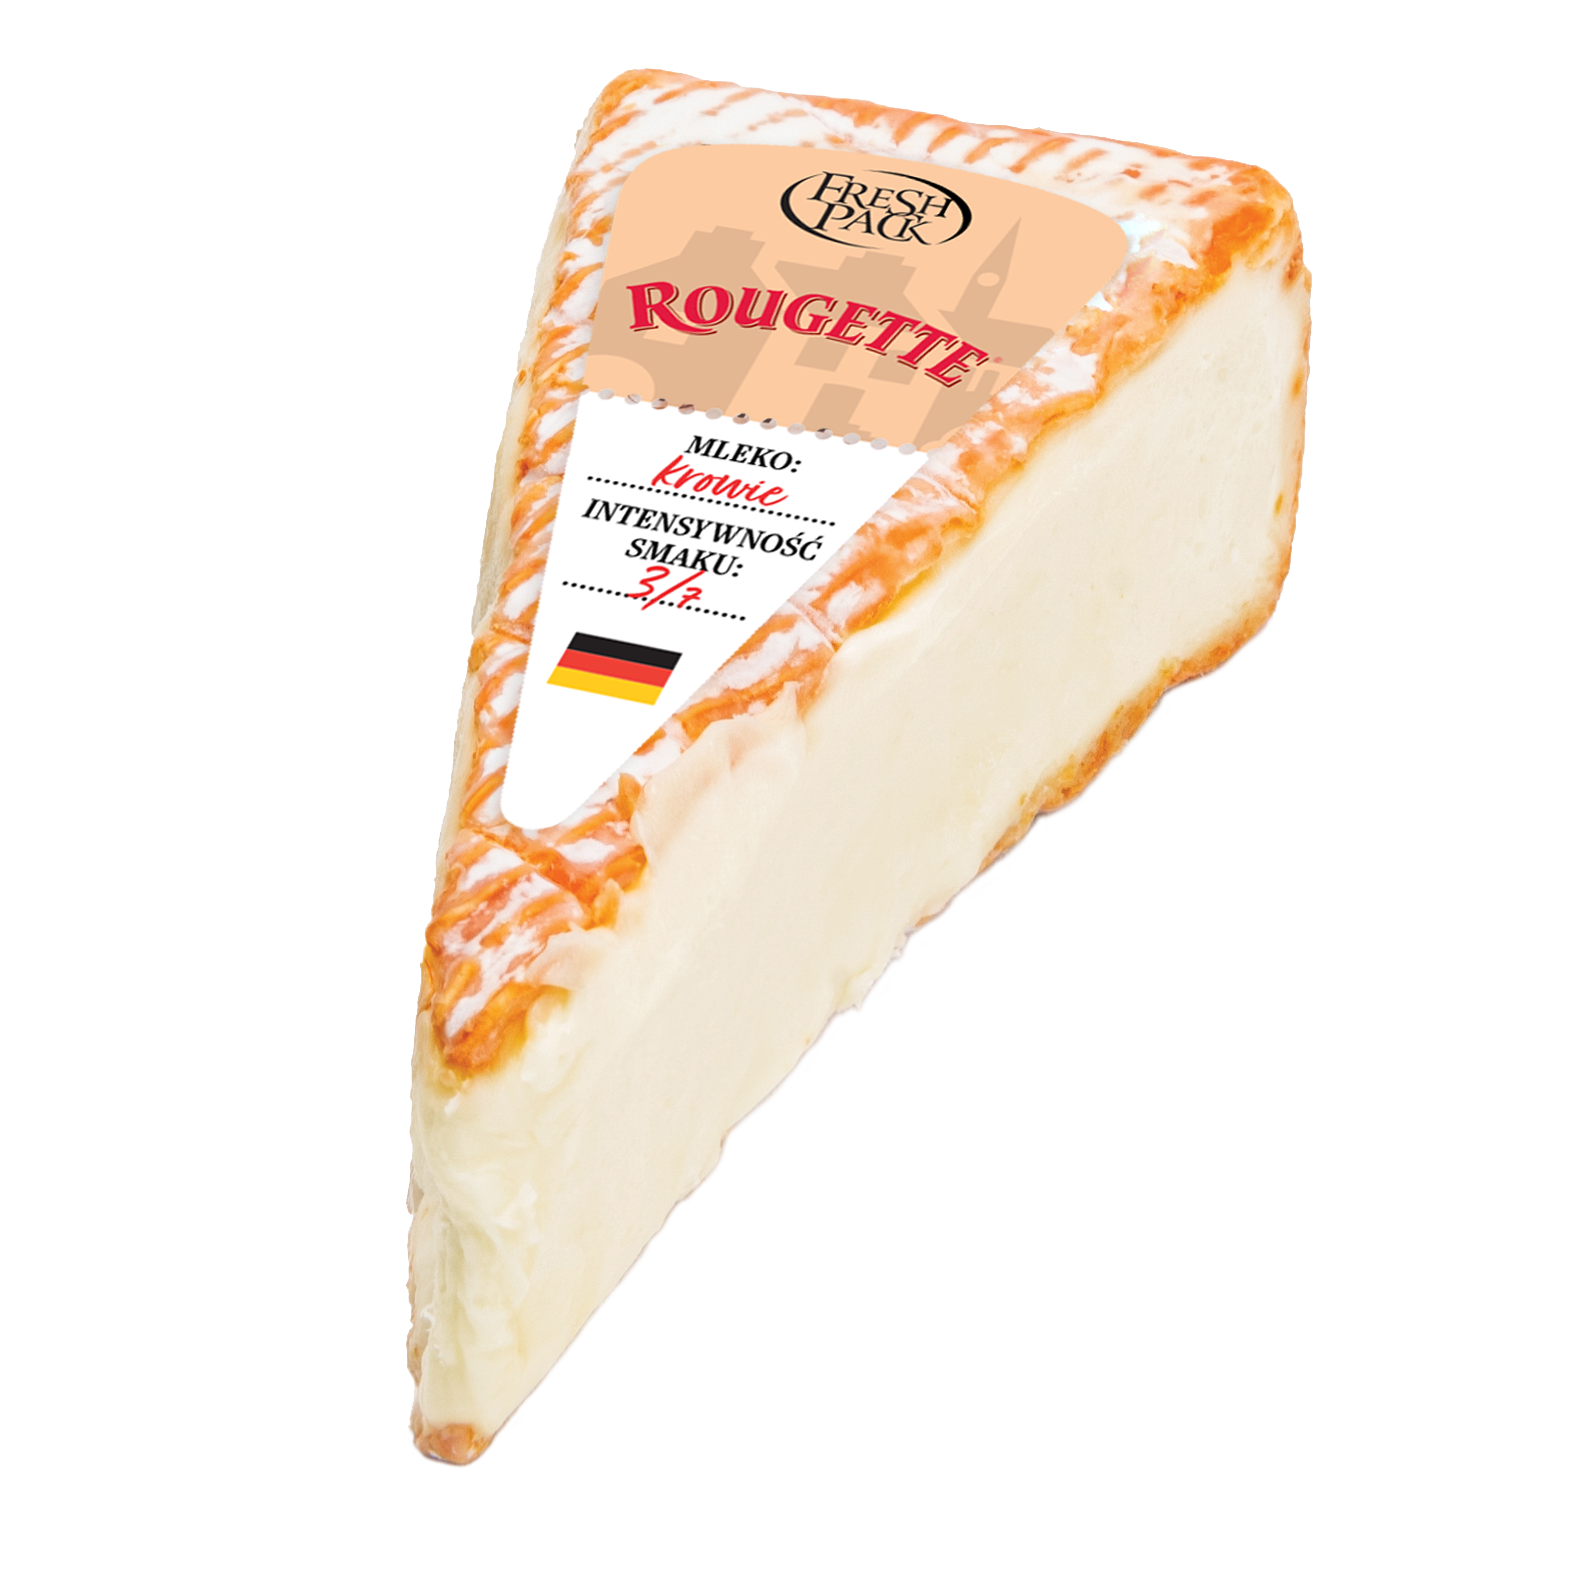 ROUGETTE CHEESE wedge